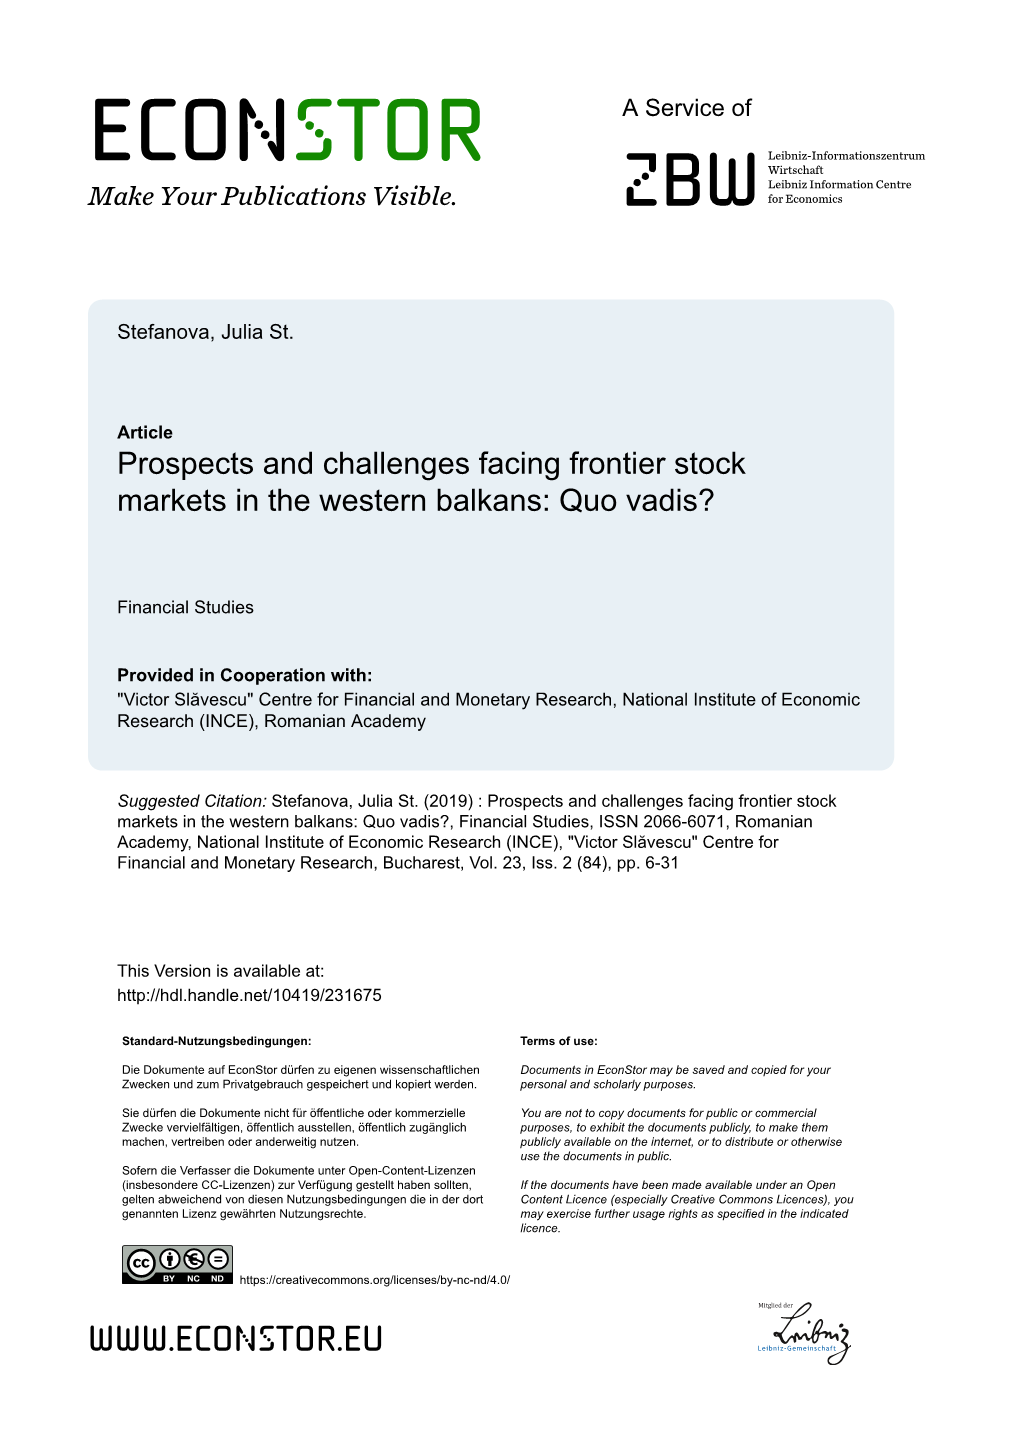 Prospects and Challenges Facing Frontier Stock Markets in the Western Balkans: Quo Vadis?